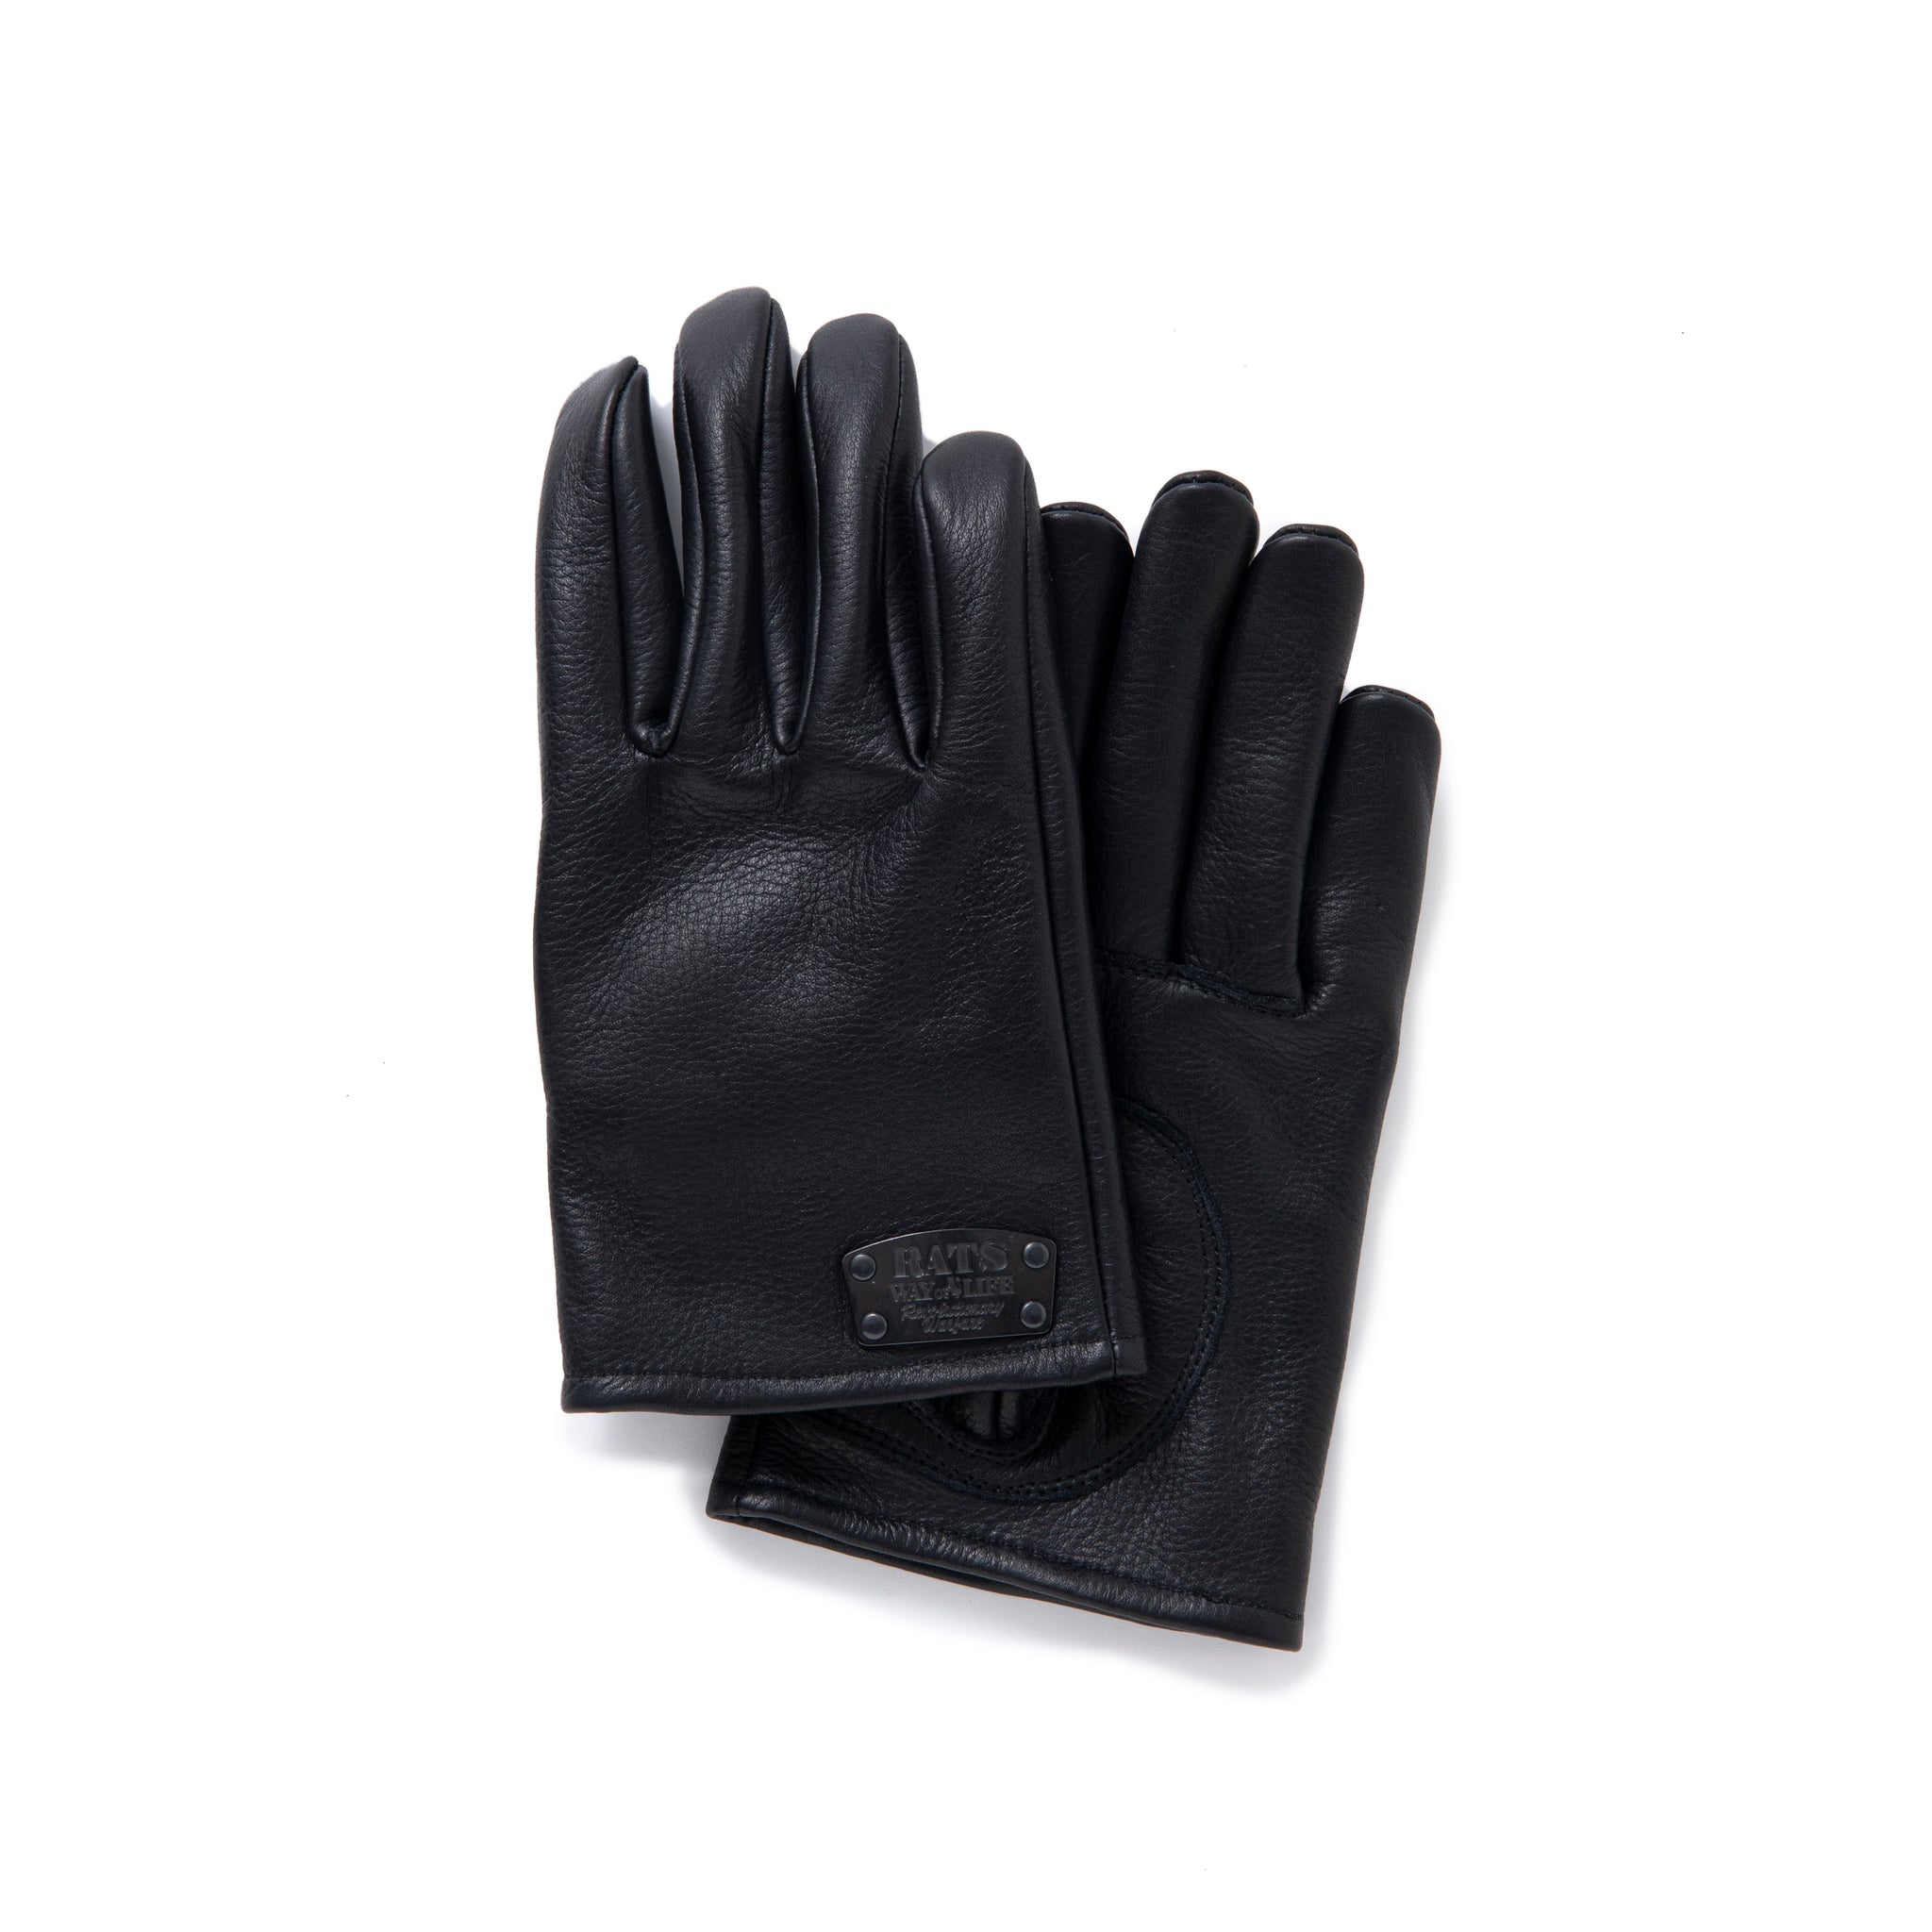 COMBI LEATHER GLOVE – JOLLY ROGER